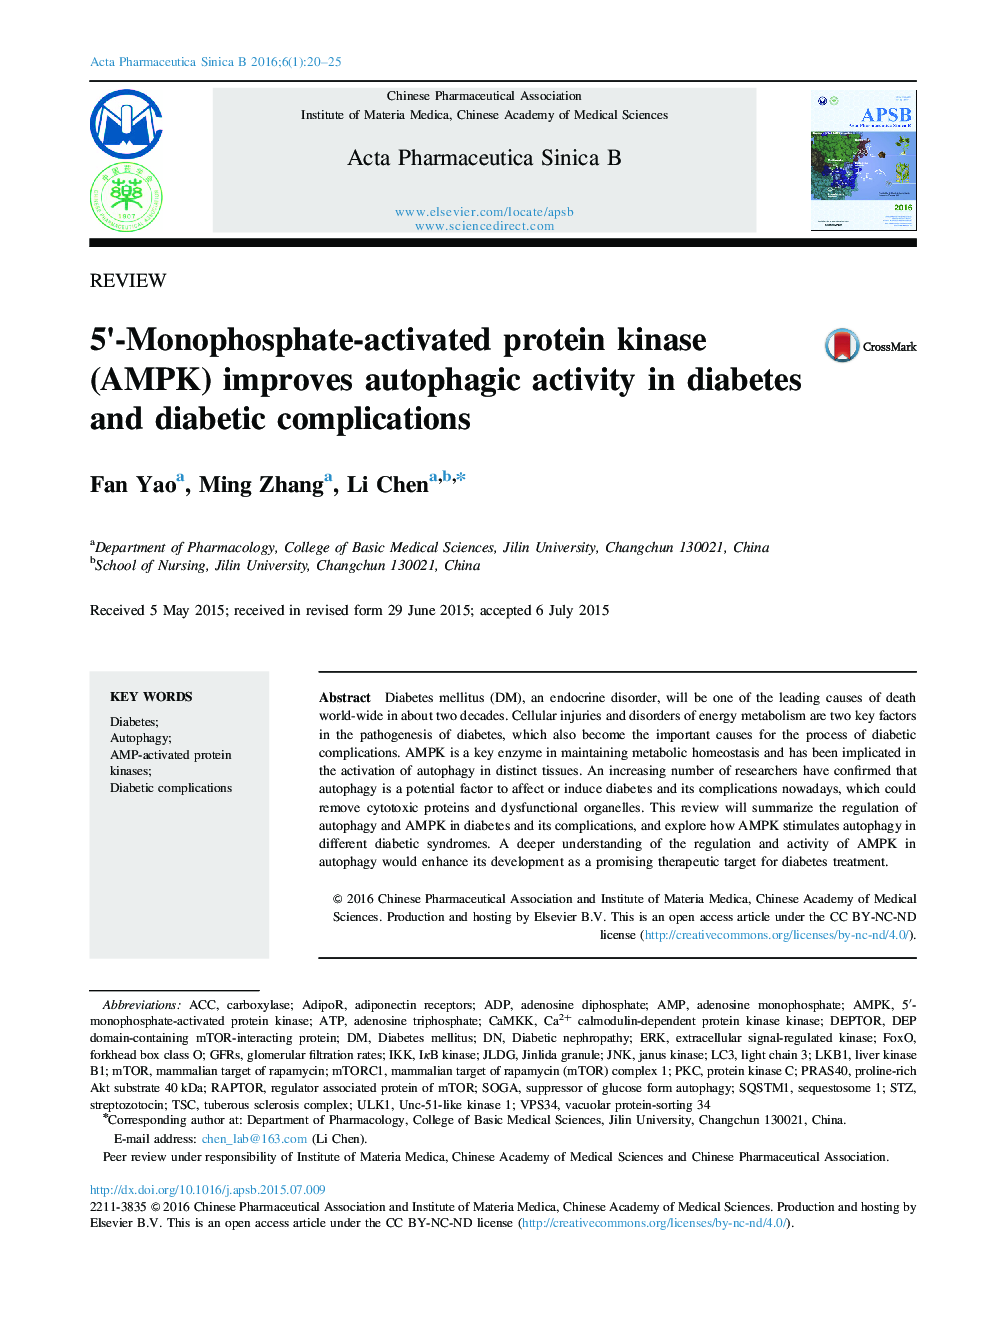 5'-Monophosphate-activated protein kinase (AMPK) improves autophagic activity in diabetes and diabetic complications 